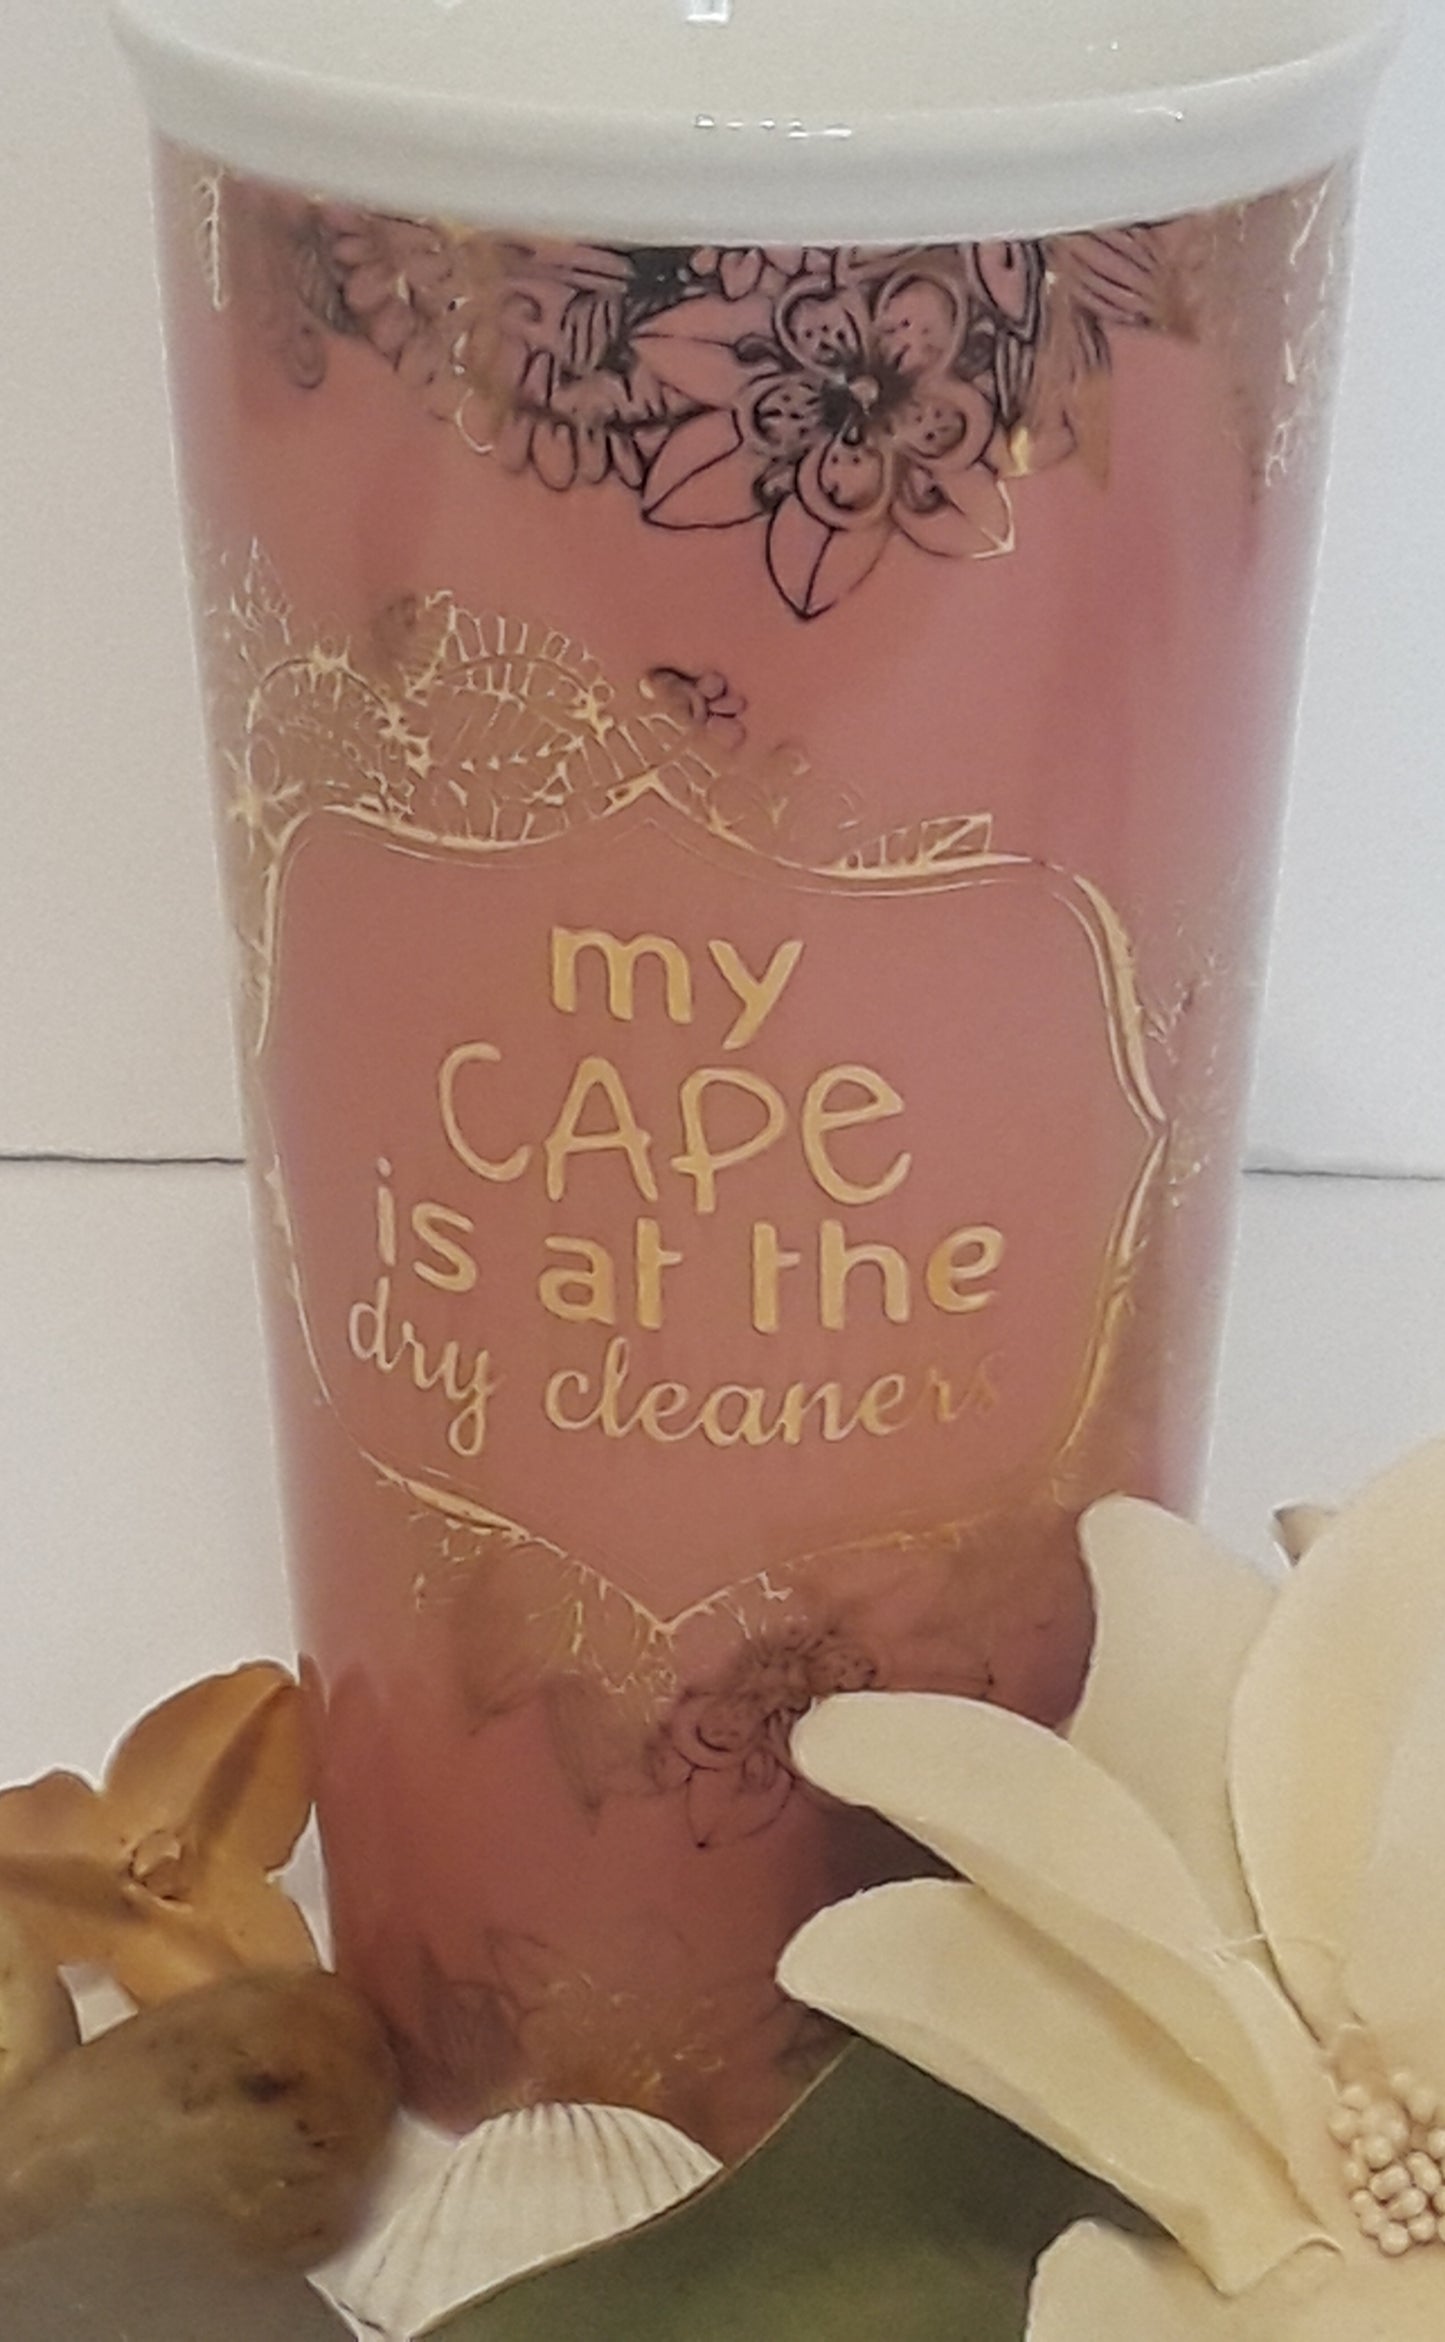 My Cape is at the Dry Cleaners Mug 18oz